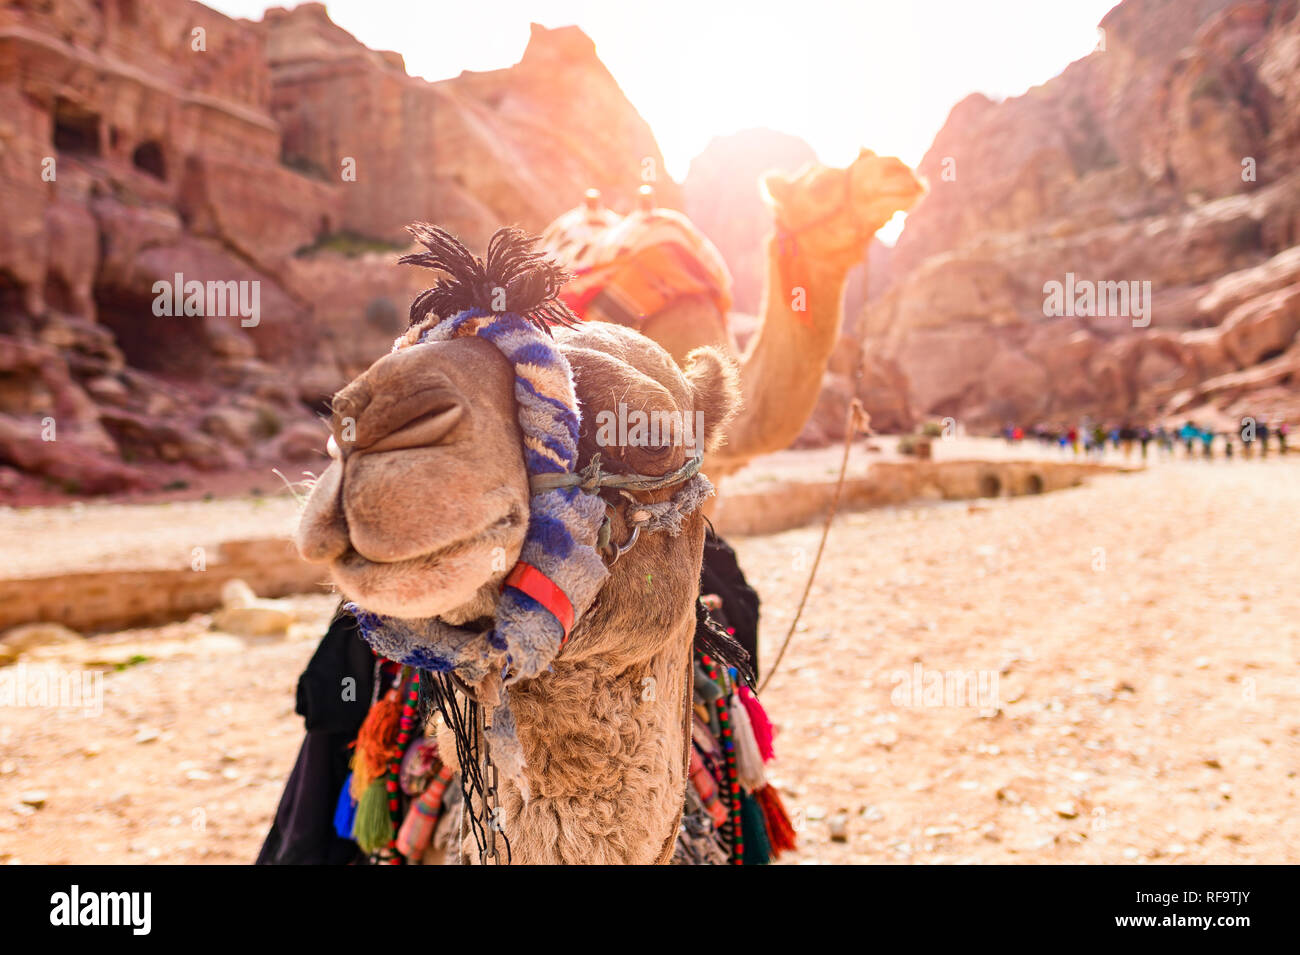 Close-up view of two beautiful camels in the Unesco World Heritage Site in Petra. Petra is a historical and archaeological city in southern Jordan. Stock Photo